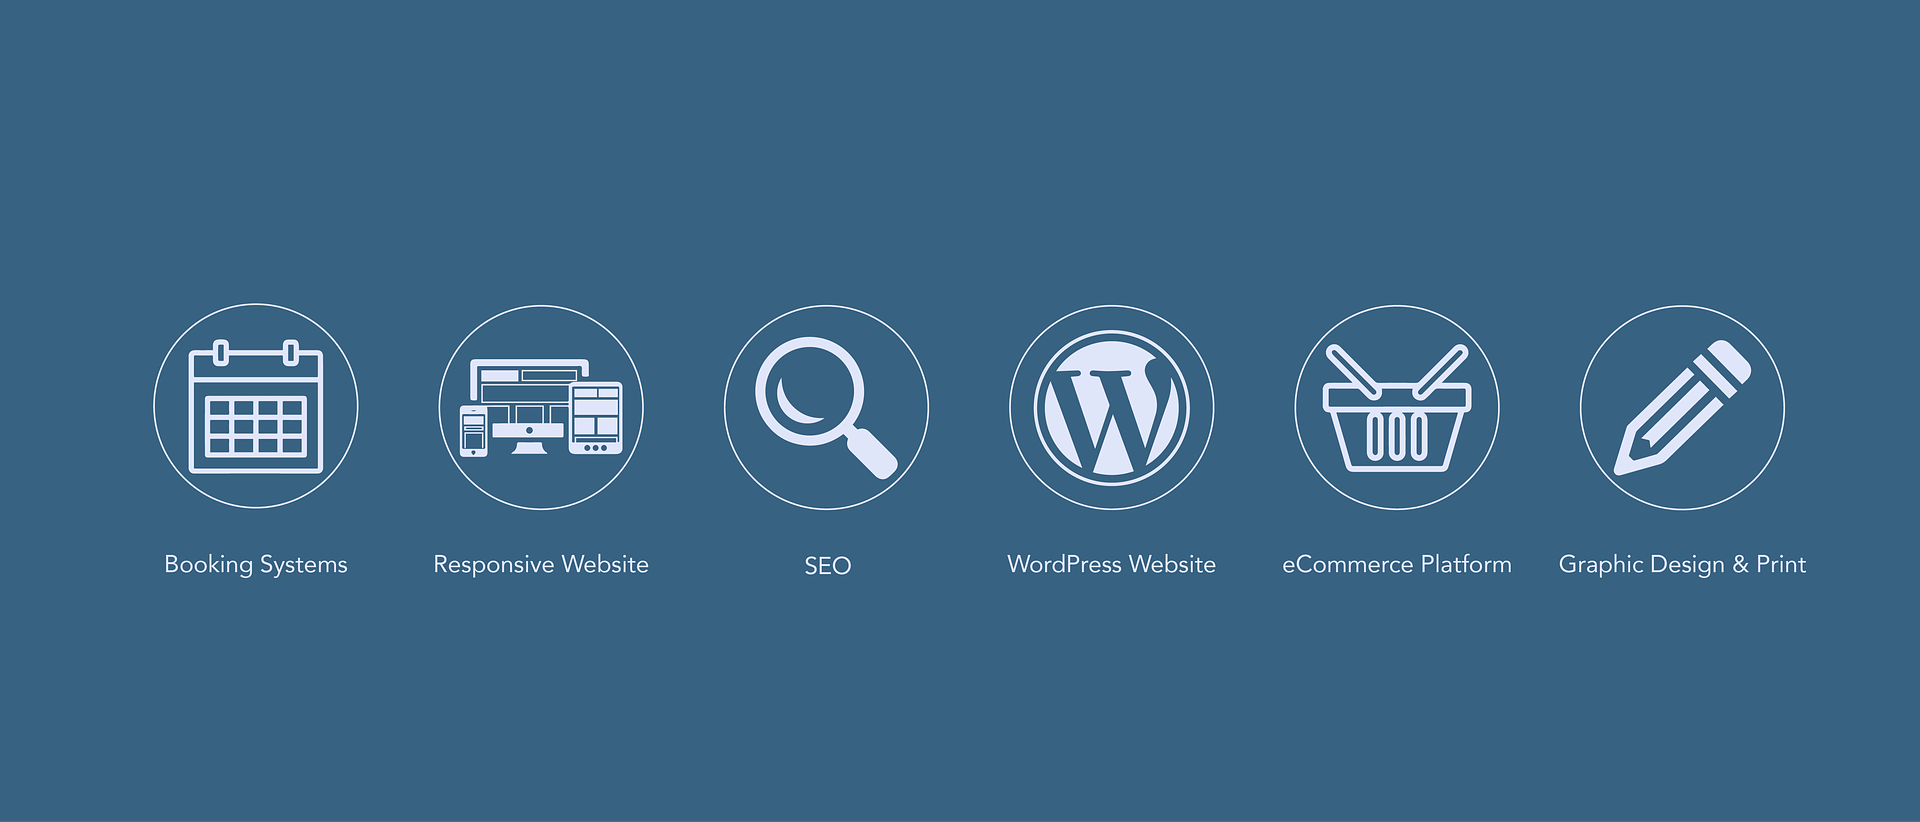 WordPress Developer Tools and Plugins They Must use for Faster Work